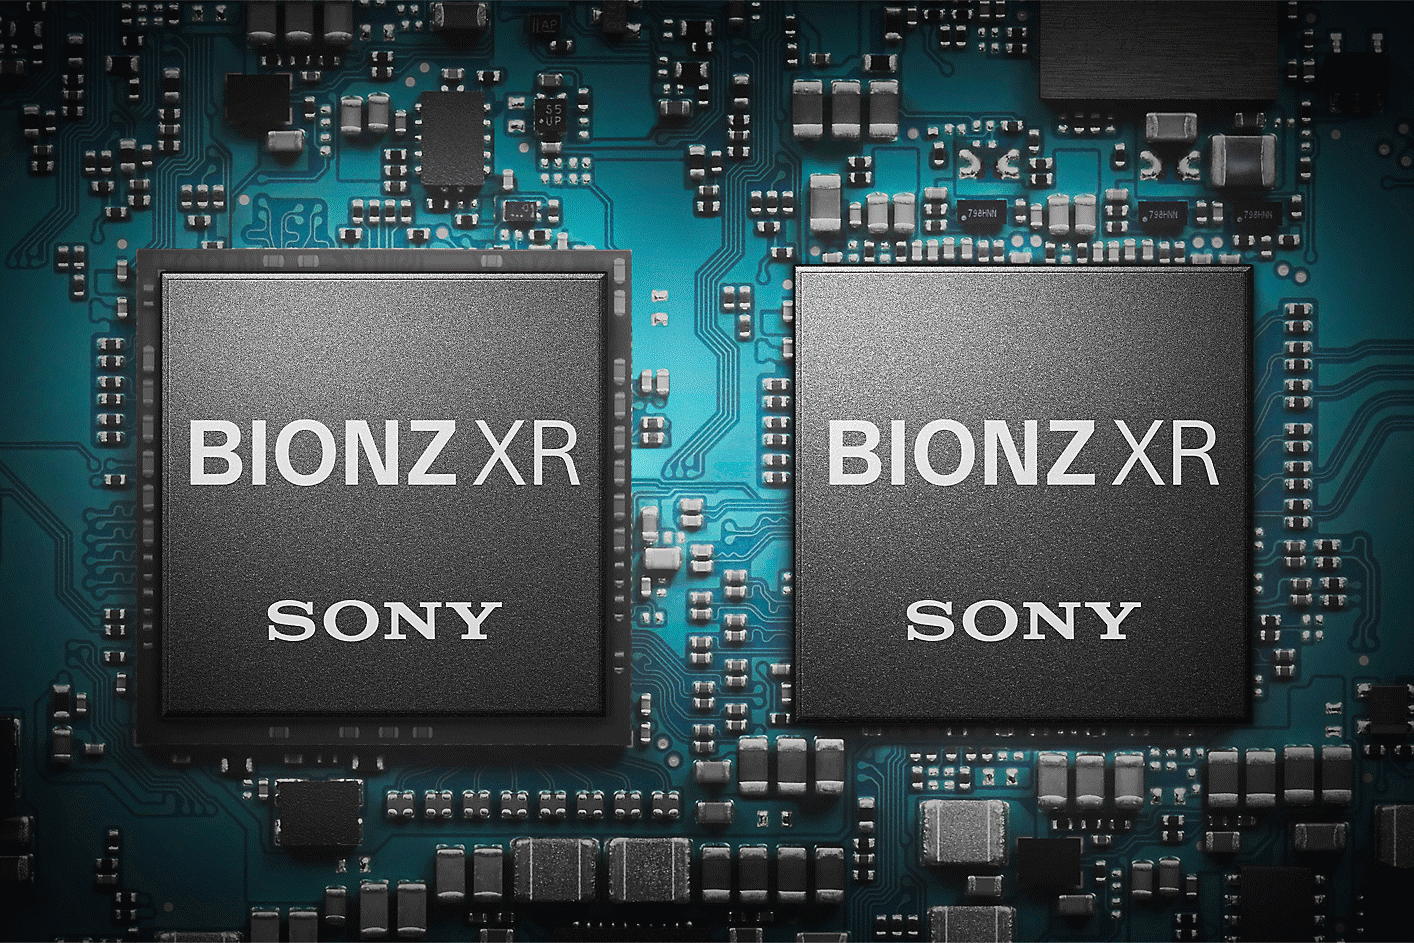 Image of BIONZ XR image processing engine on the device